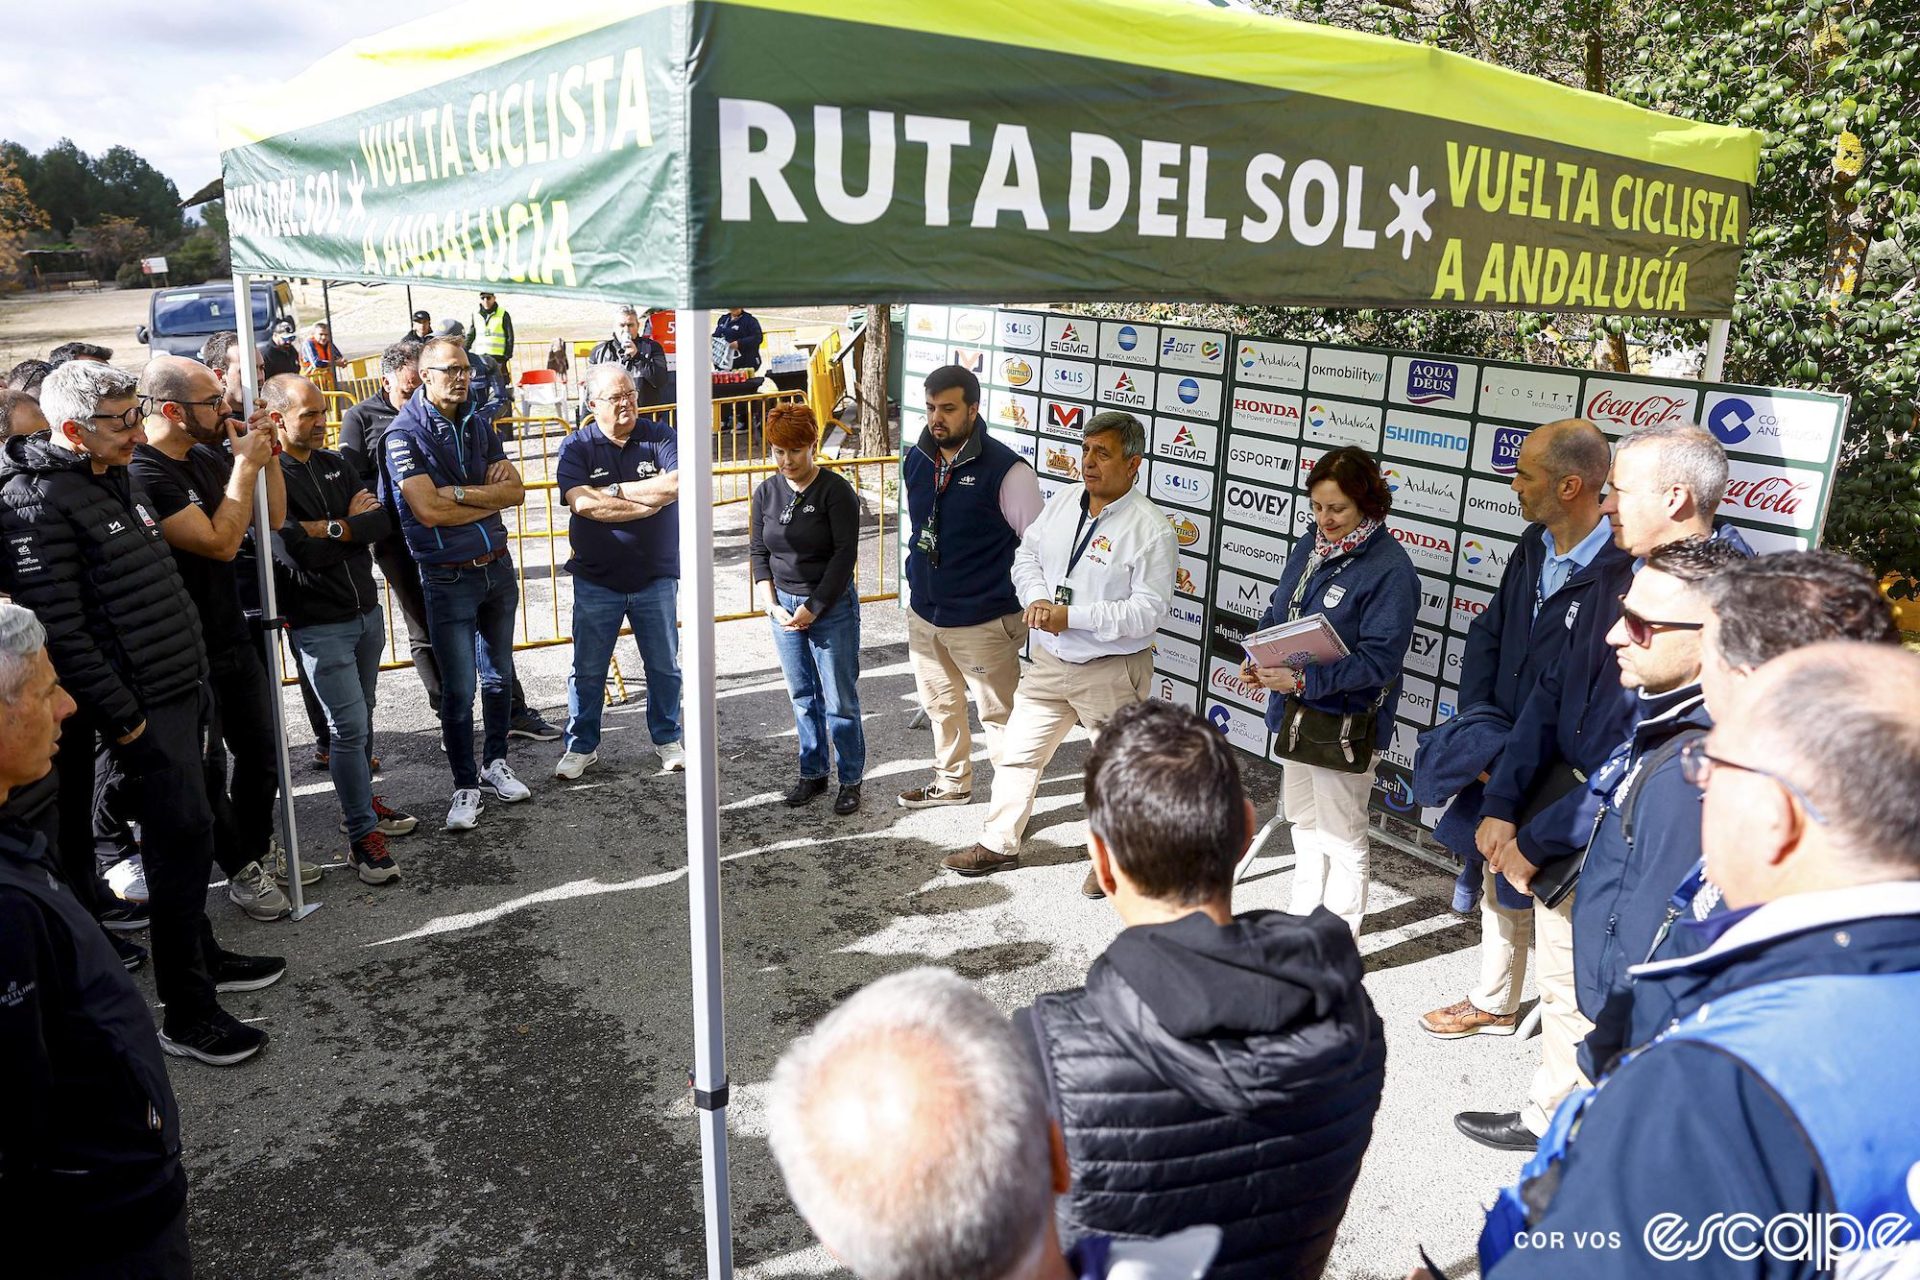 Race organizers of the Ruta del Sol hold an impromptu staff meeting to discuss the radical shortening of the race. They're standing in a circle under a RdS pop-up tent as director Joaquin Cuevas announces changes.